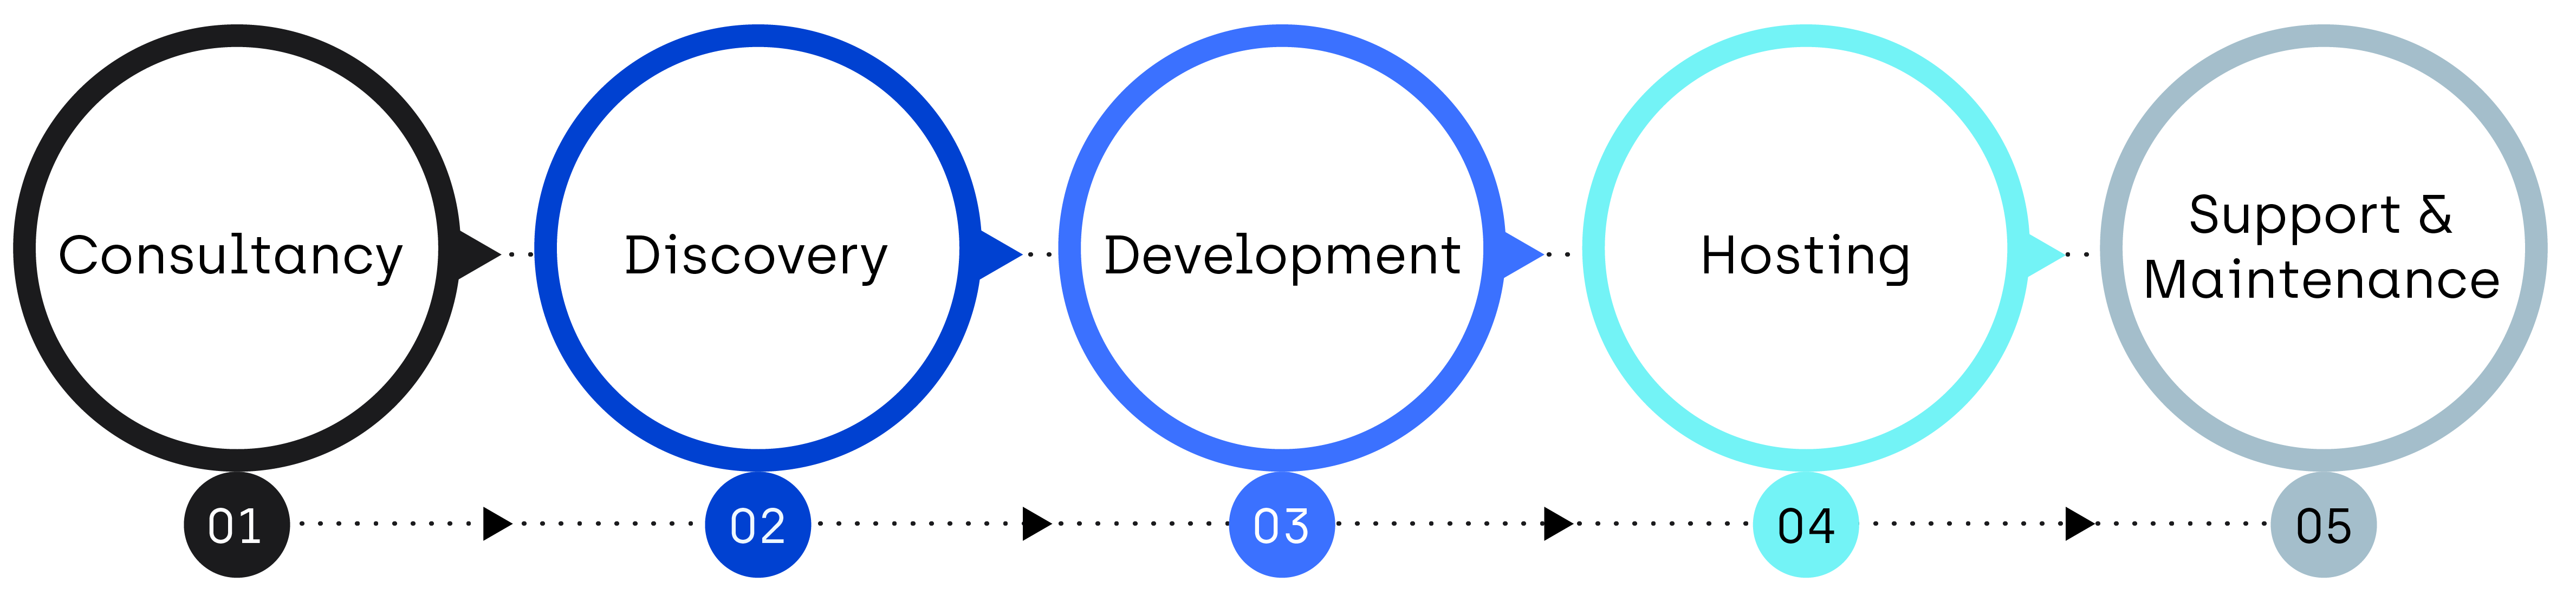 Graphic showing the end-to-end Software Development process